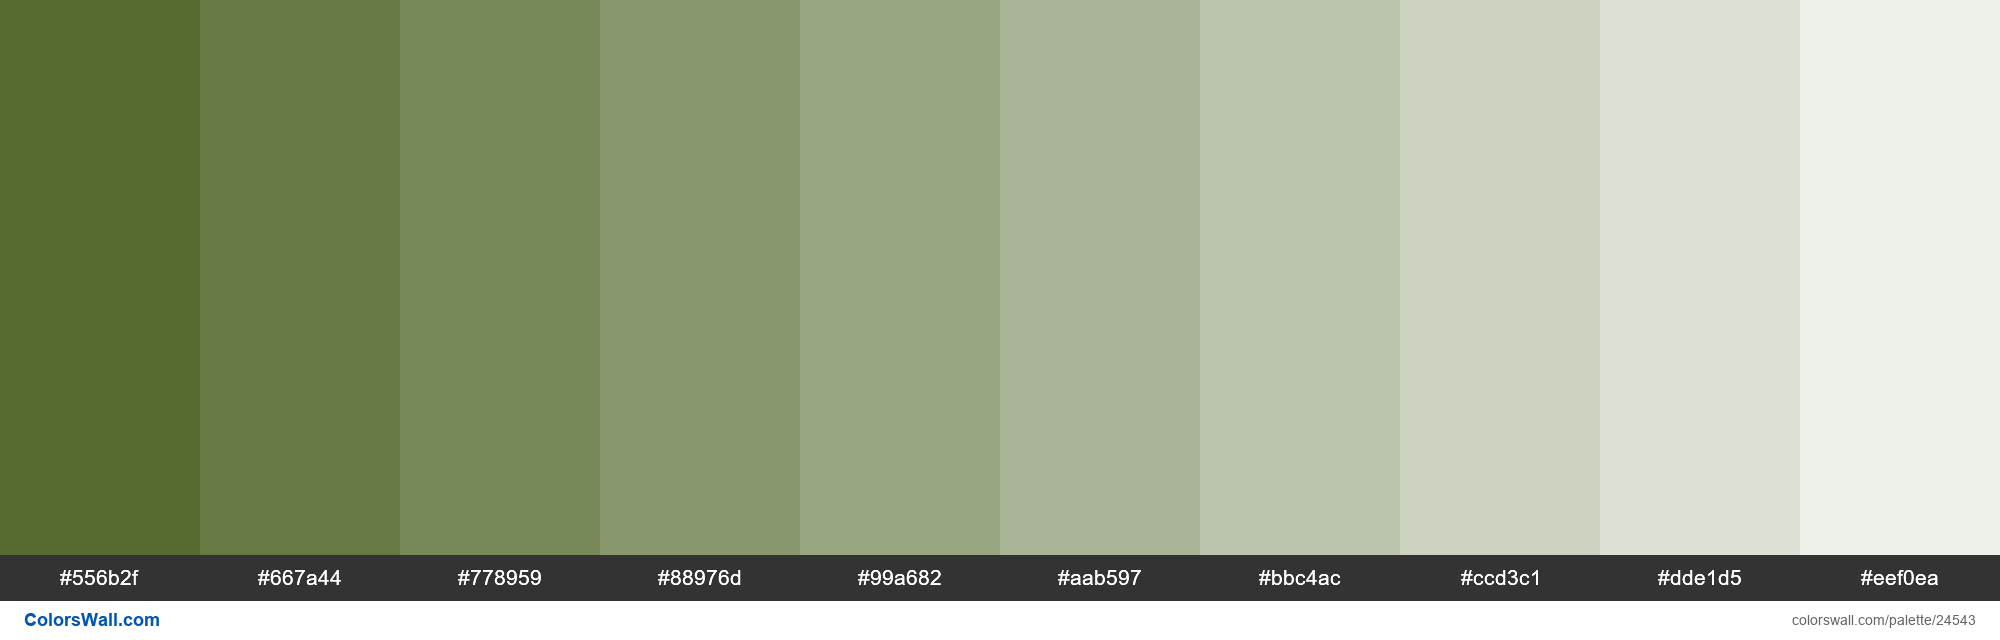 Tints of Dark Olive Green #556B2F hex color - ColorsWall